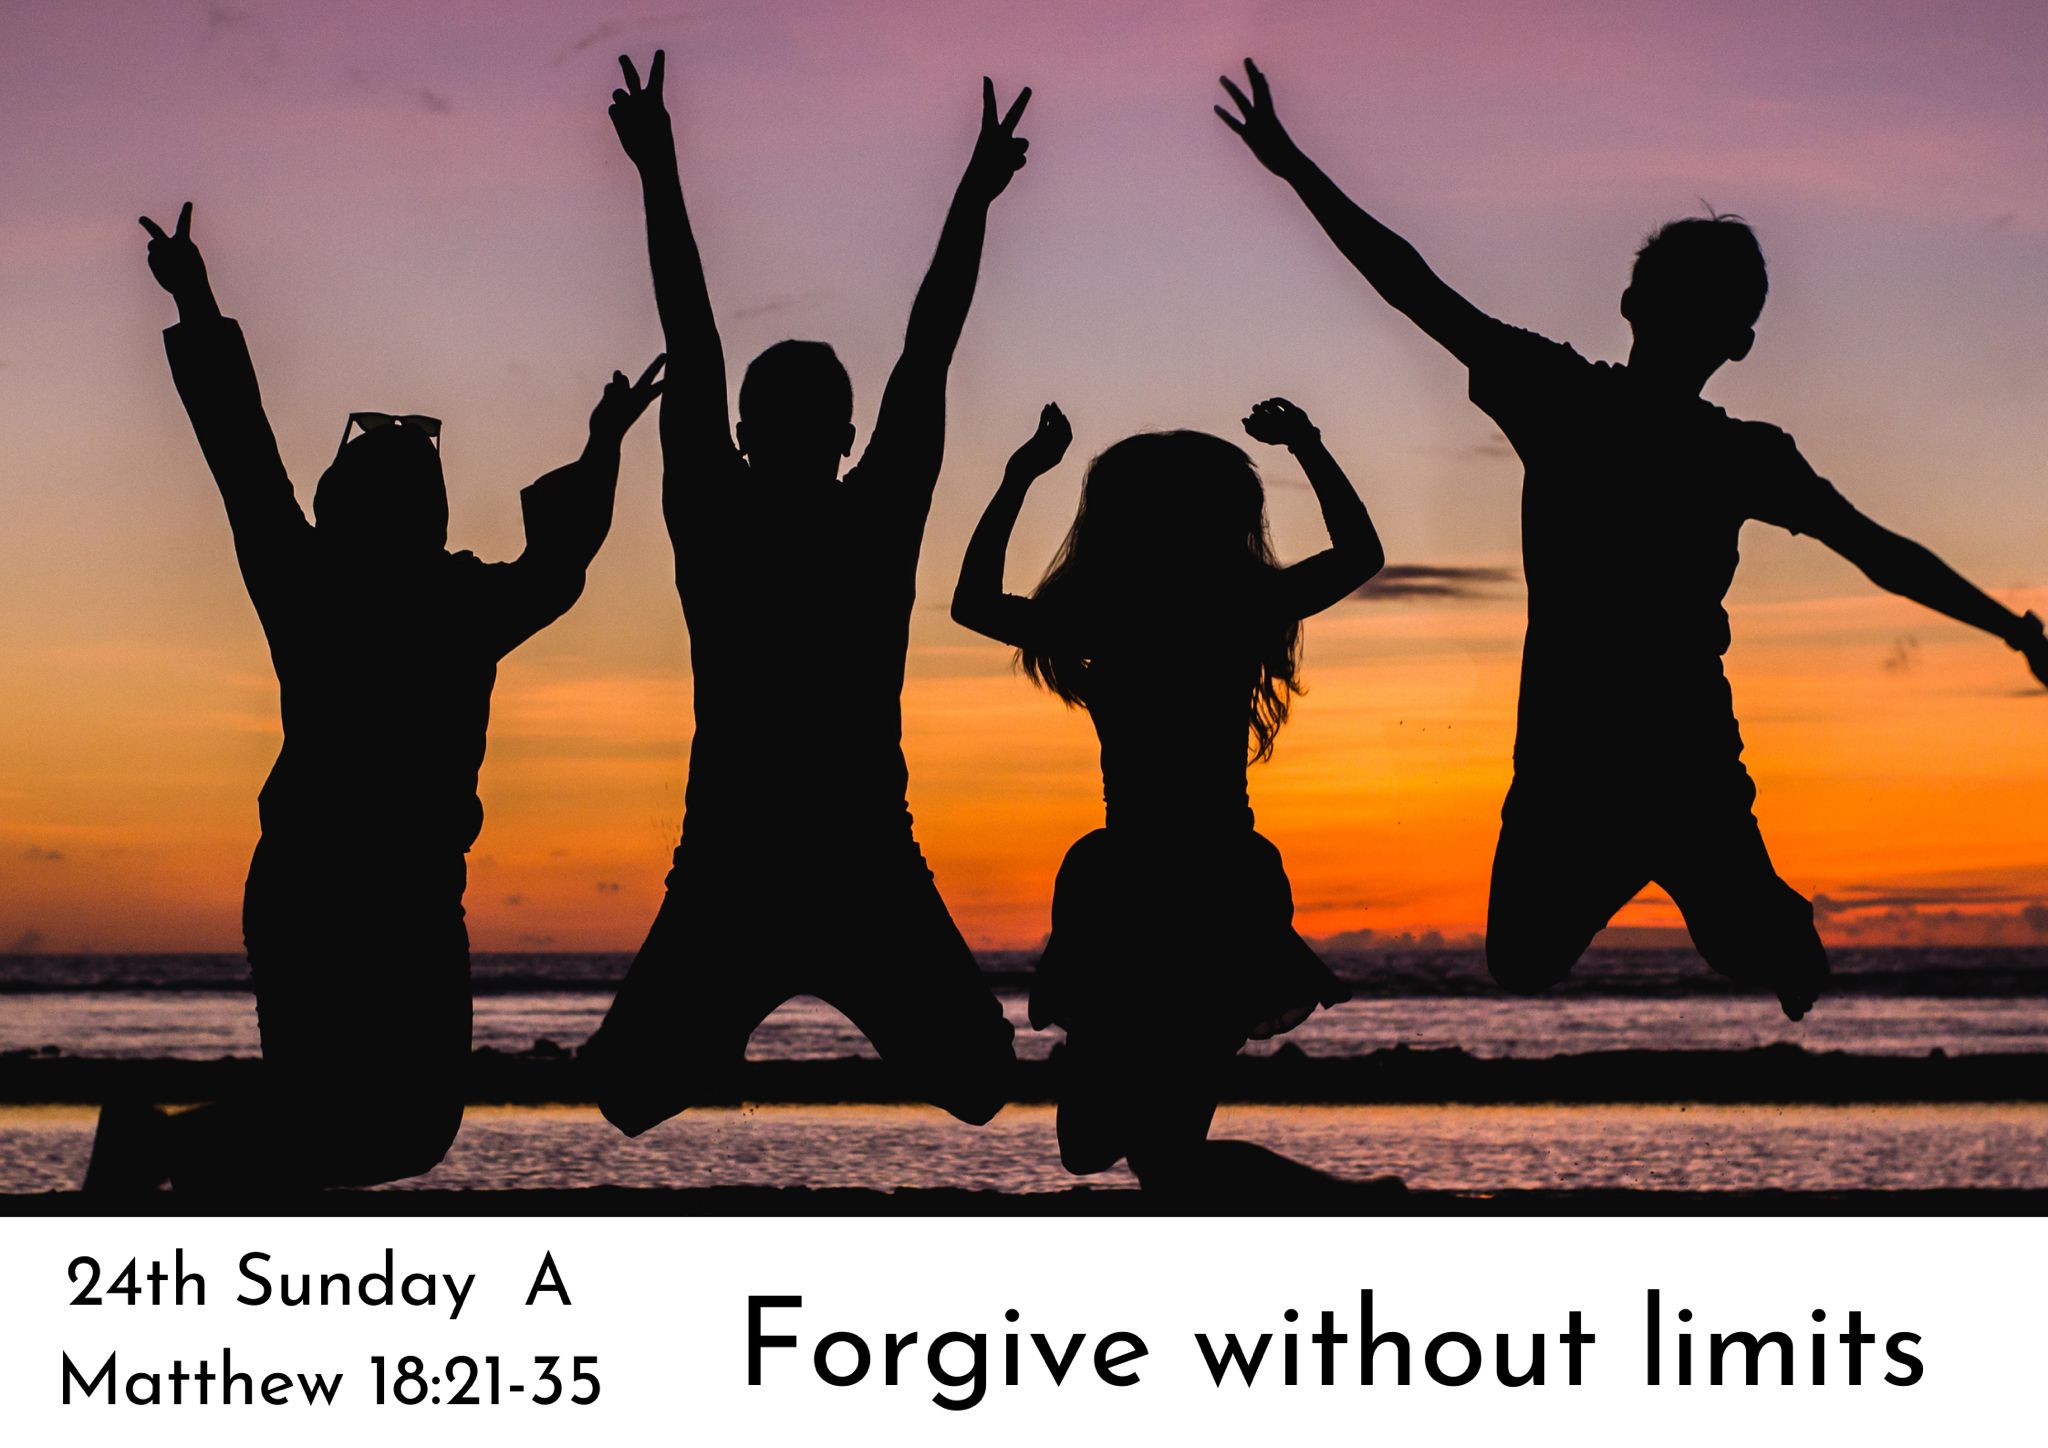 Forgive without limits